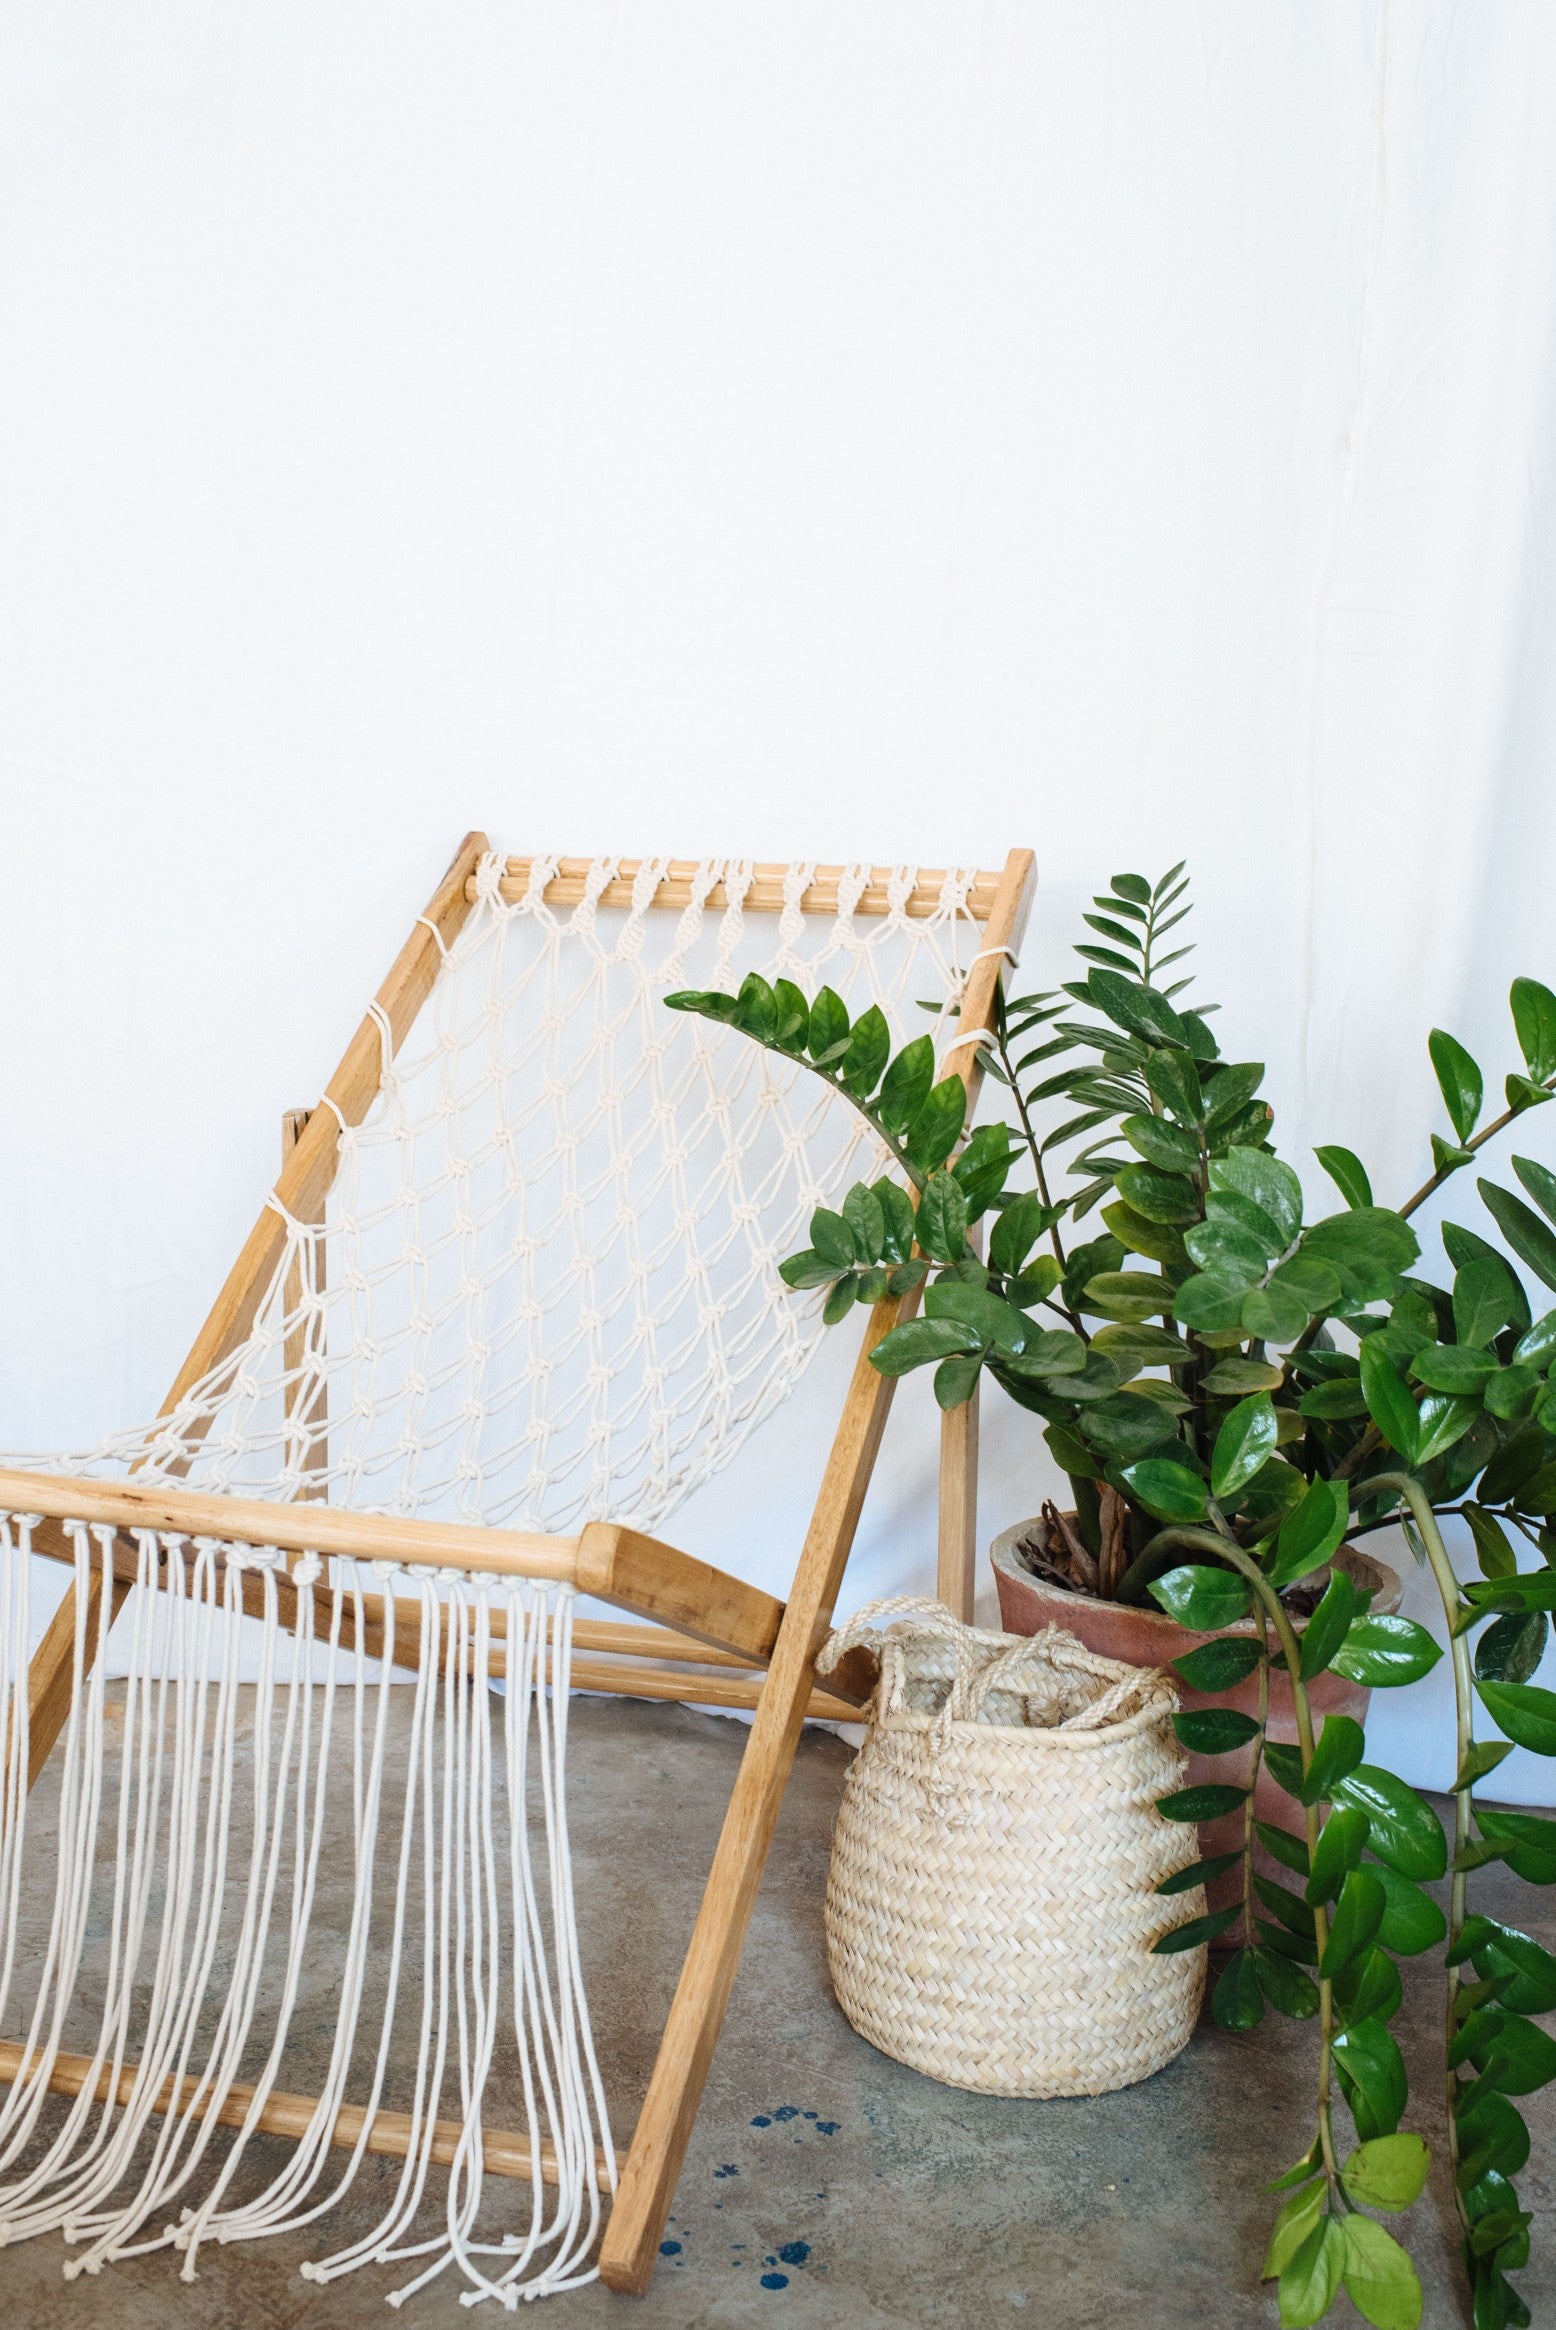 macrame chair next to a plant